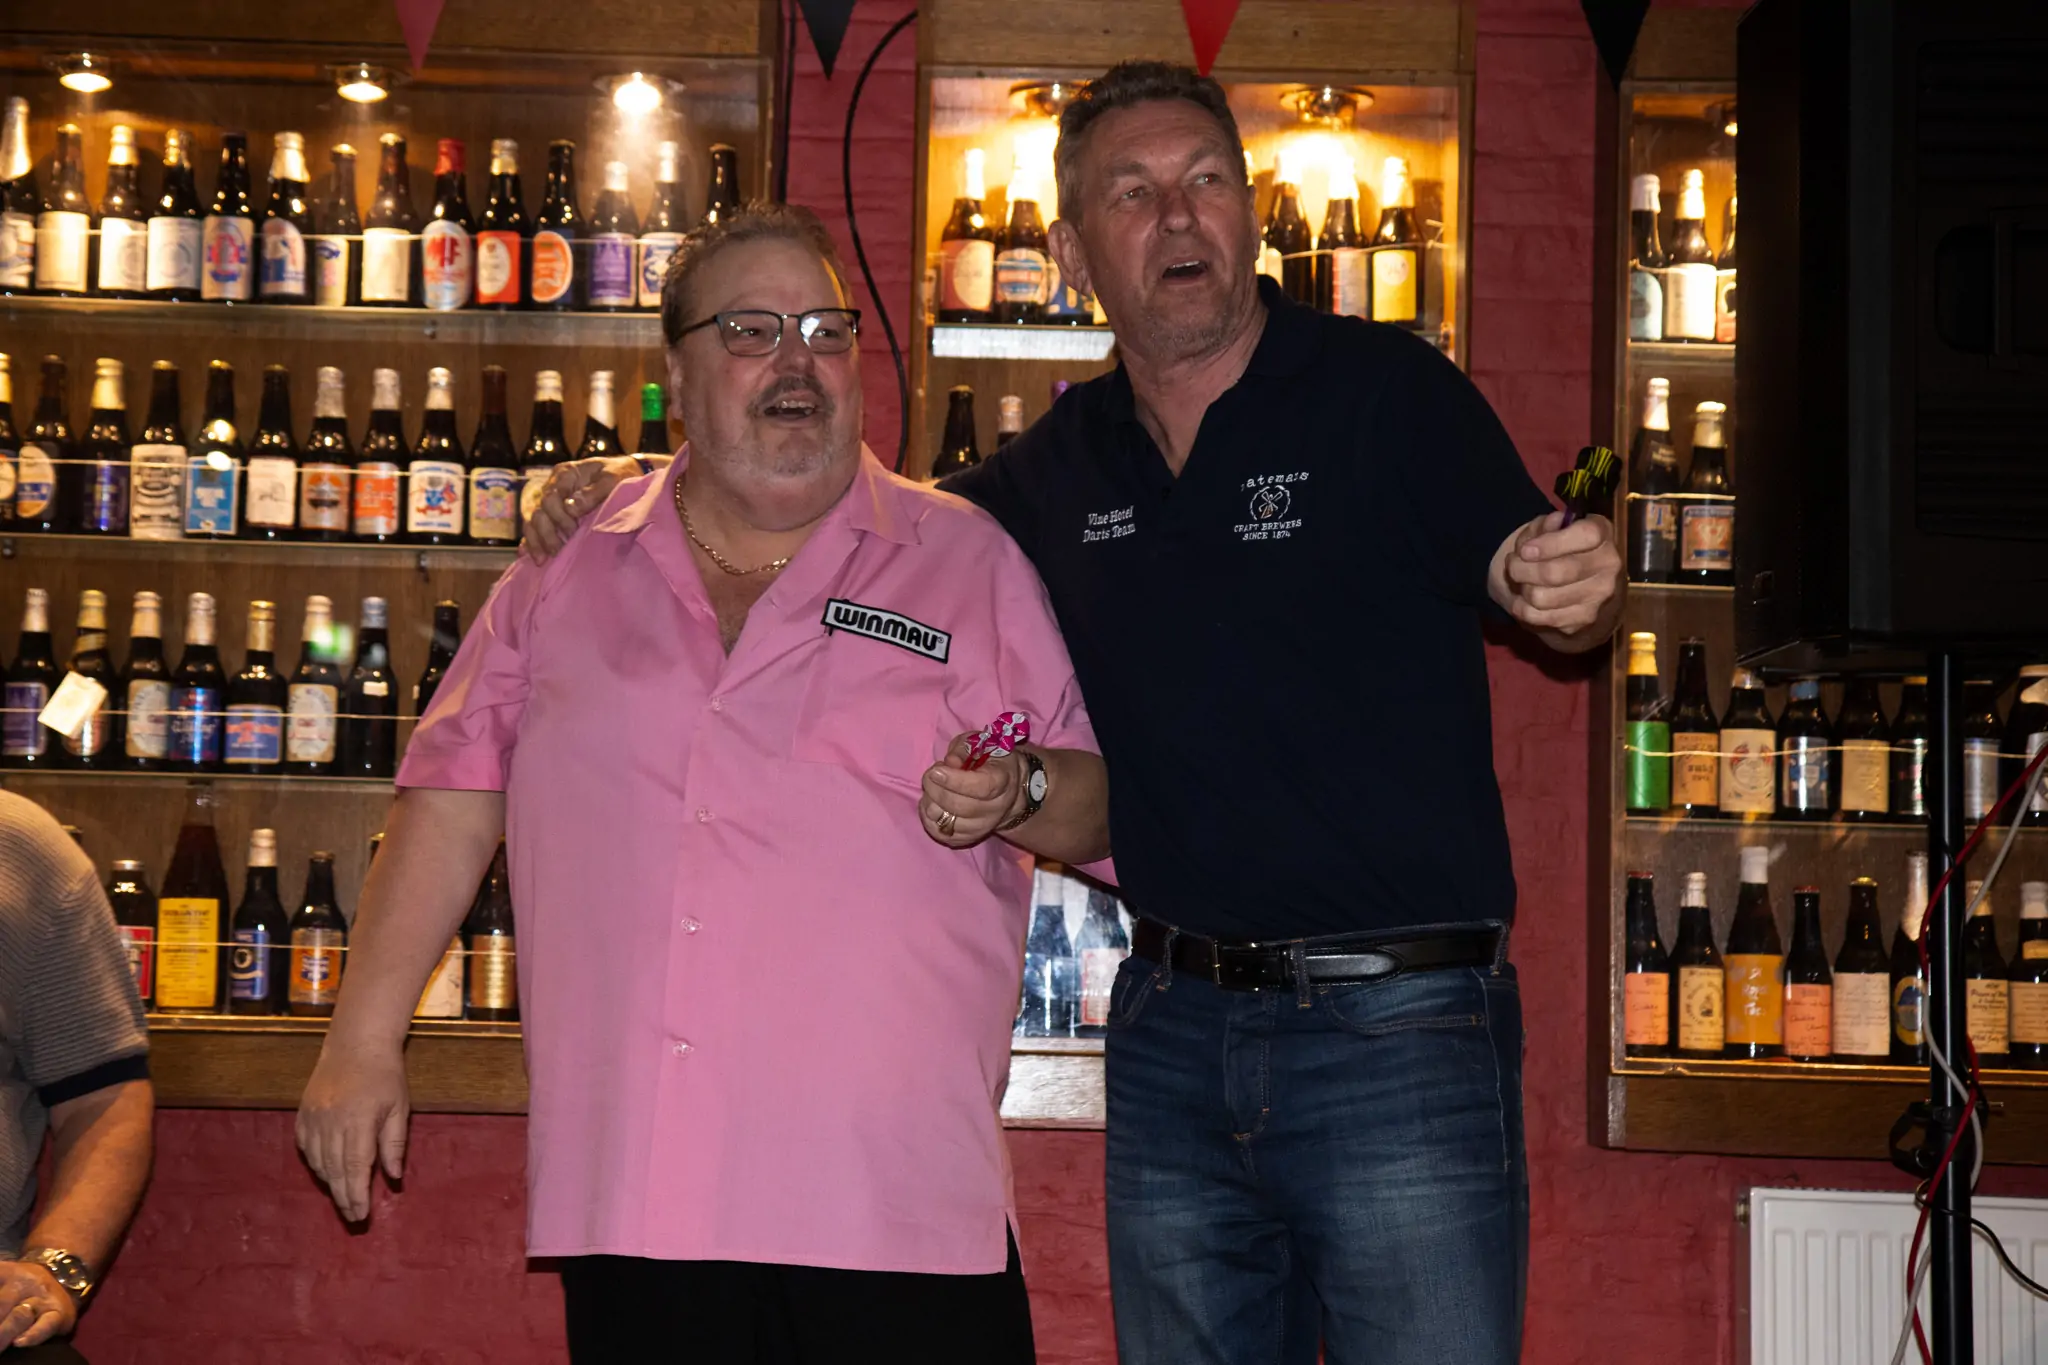 Peter Manley Pro Darts Player at the Batemans 150th anniversary celebrations darts with one of the competitors Miles Hartley.